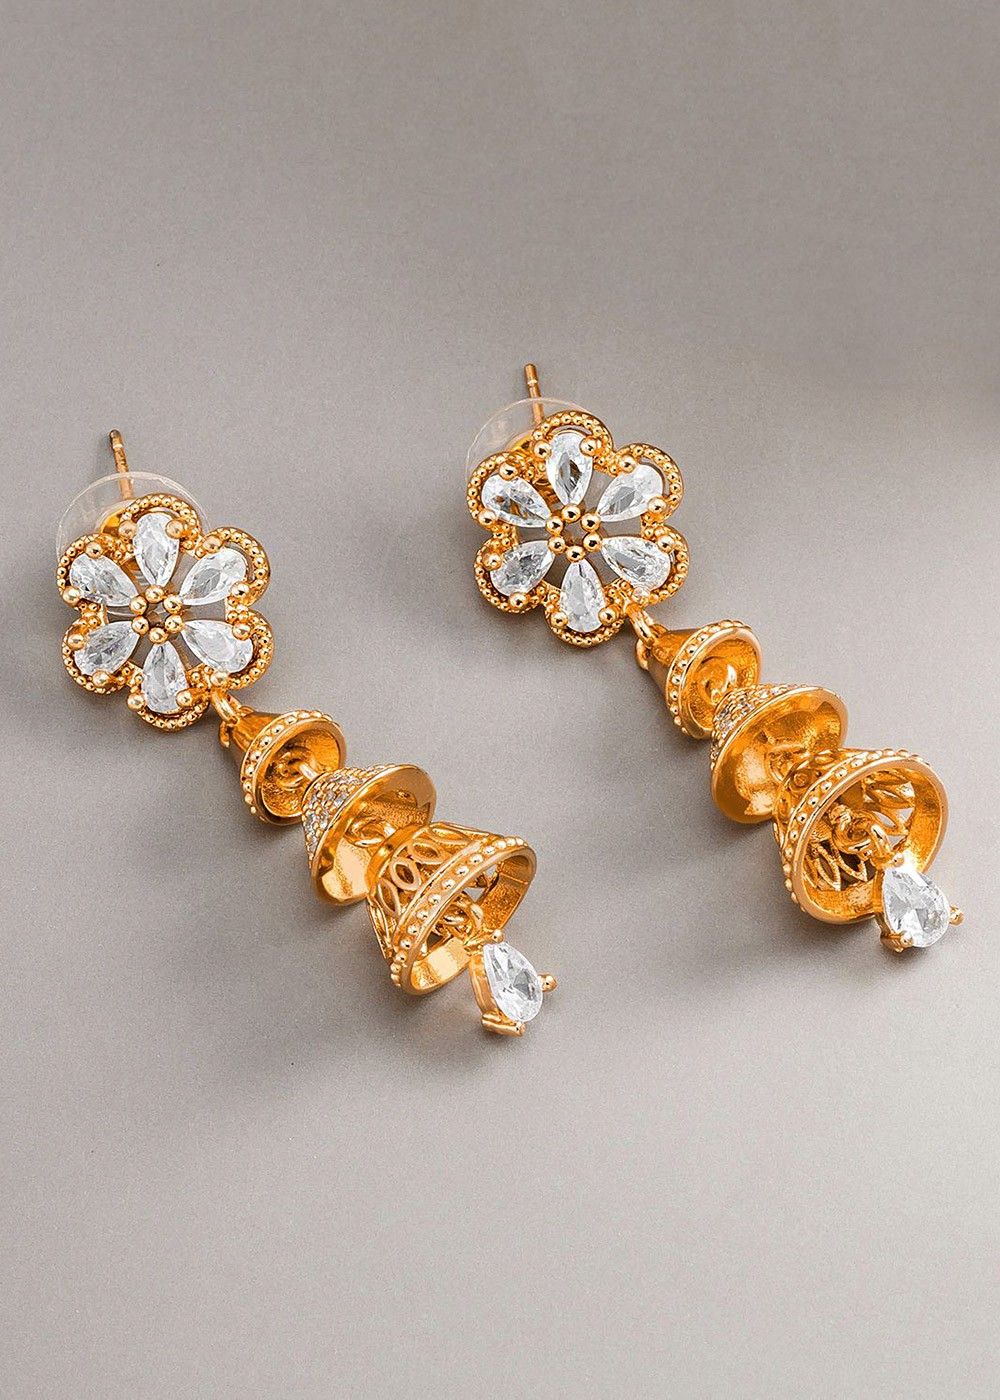 Gold Party Wear Earrings Online Shopping for Women at Low Prices-sgquangbinhtourist.com.vn